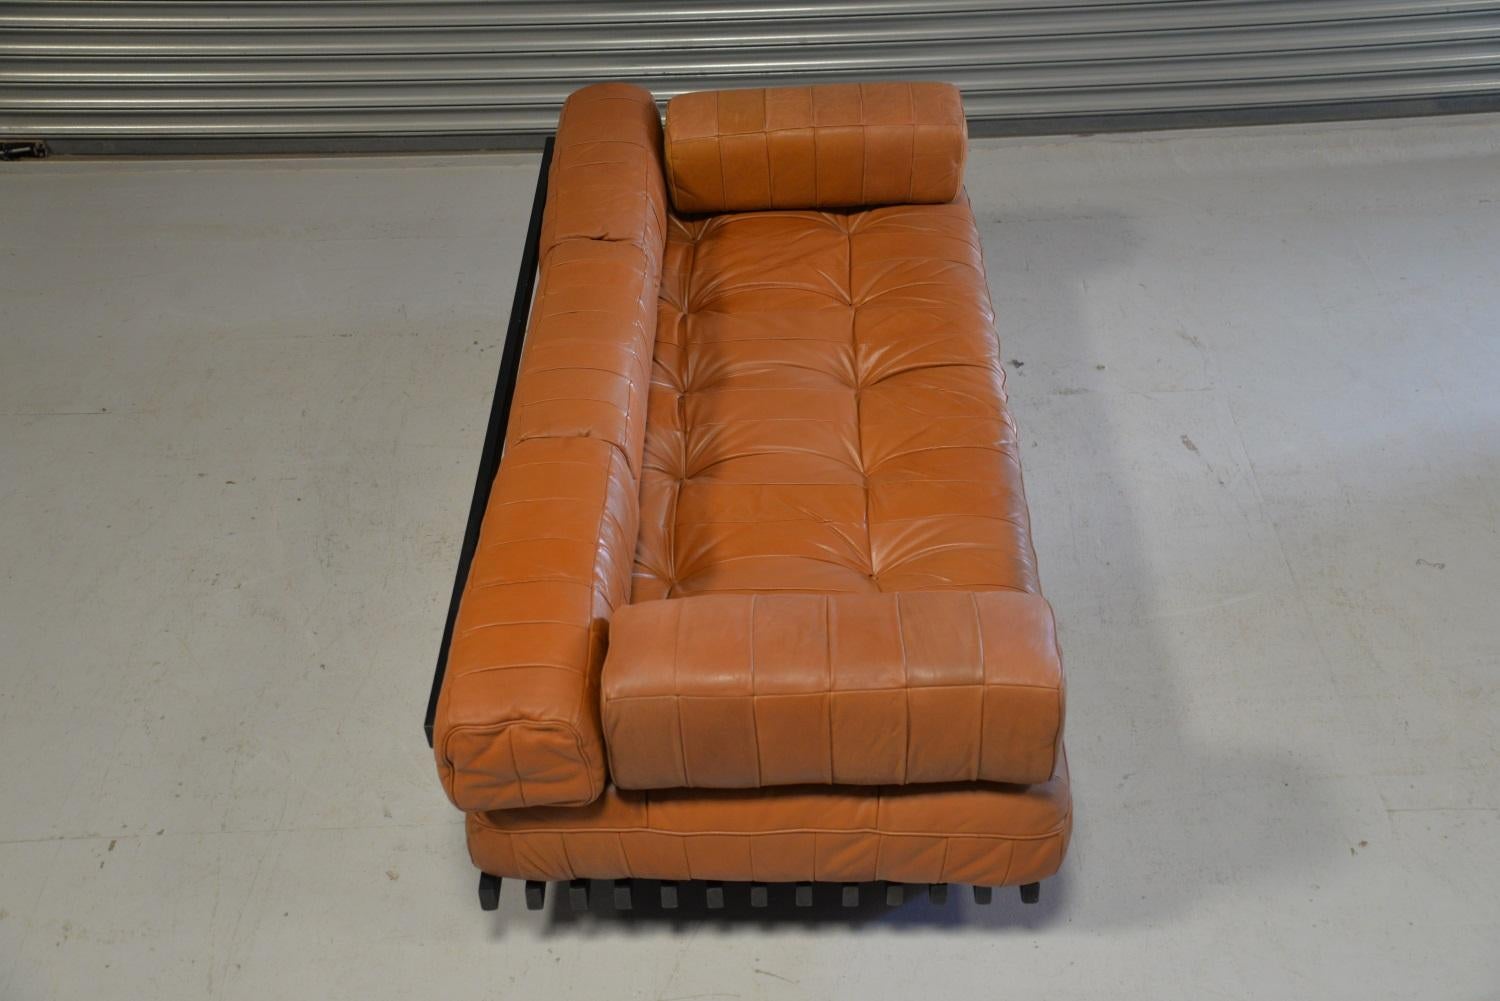 Vintage De Sede DS 80 Patchwork Leather Daybed, Switzerland, 1960s For Sale 3